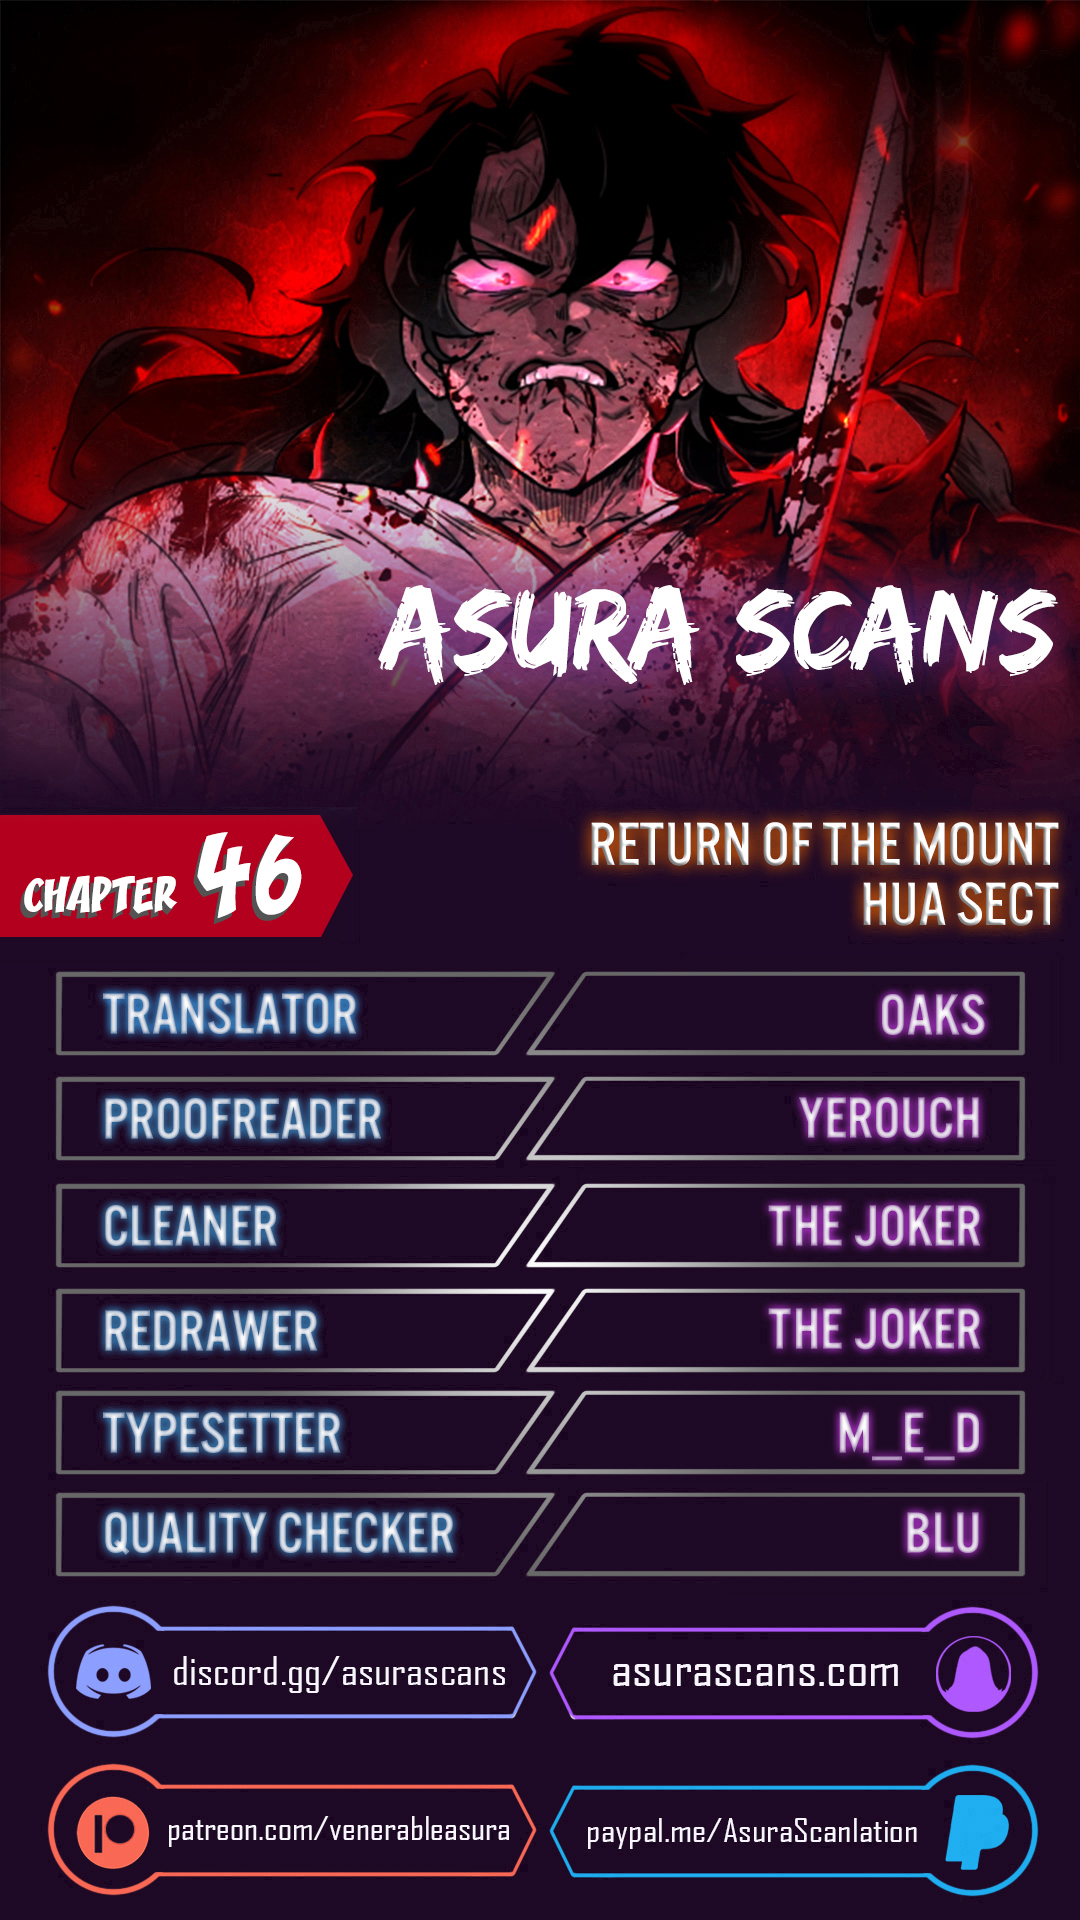 Return of the Mount Hua Sect - Chapter 14267 - Image 1